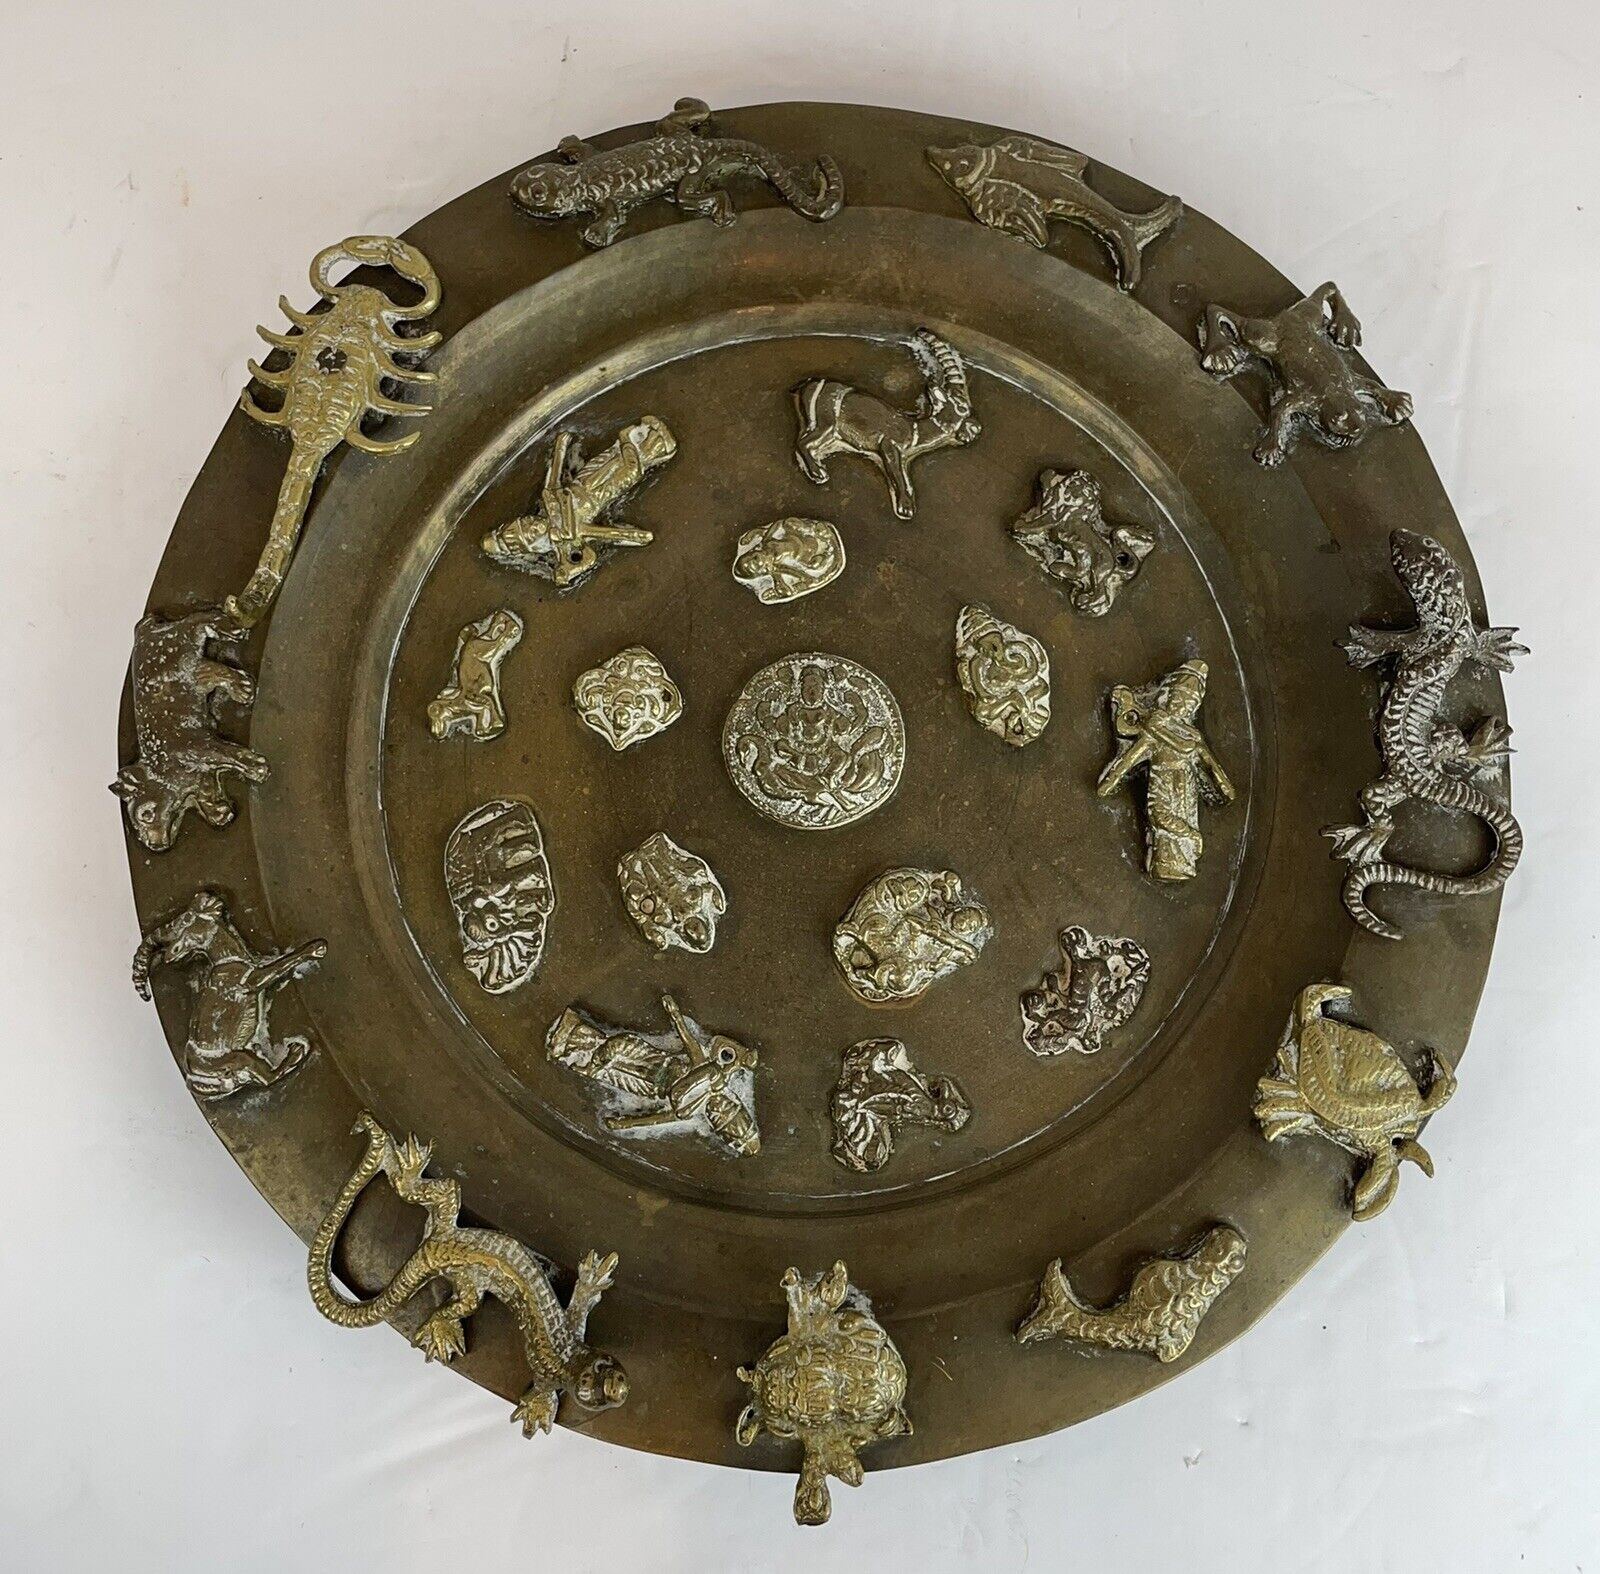 Antique Brass India Tibet Zodiac Hindu Buddhist Deity Dish Charger Footed Plate